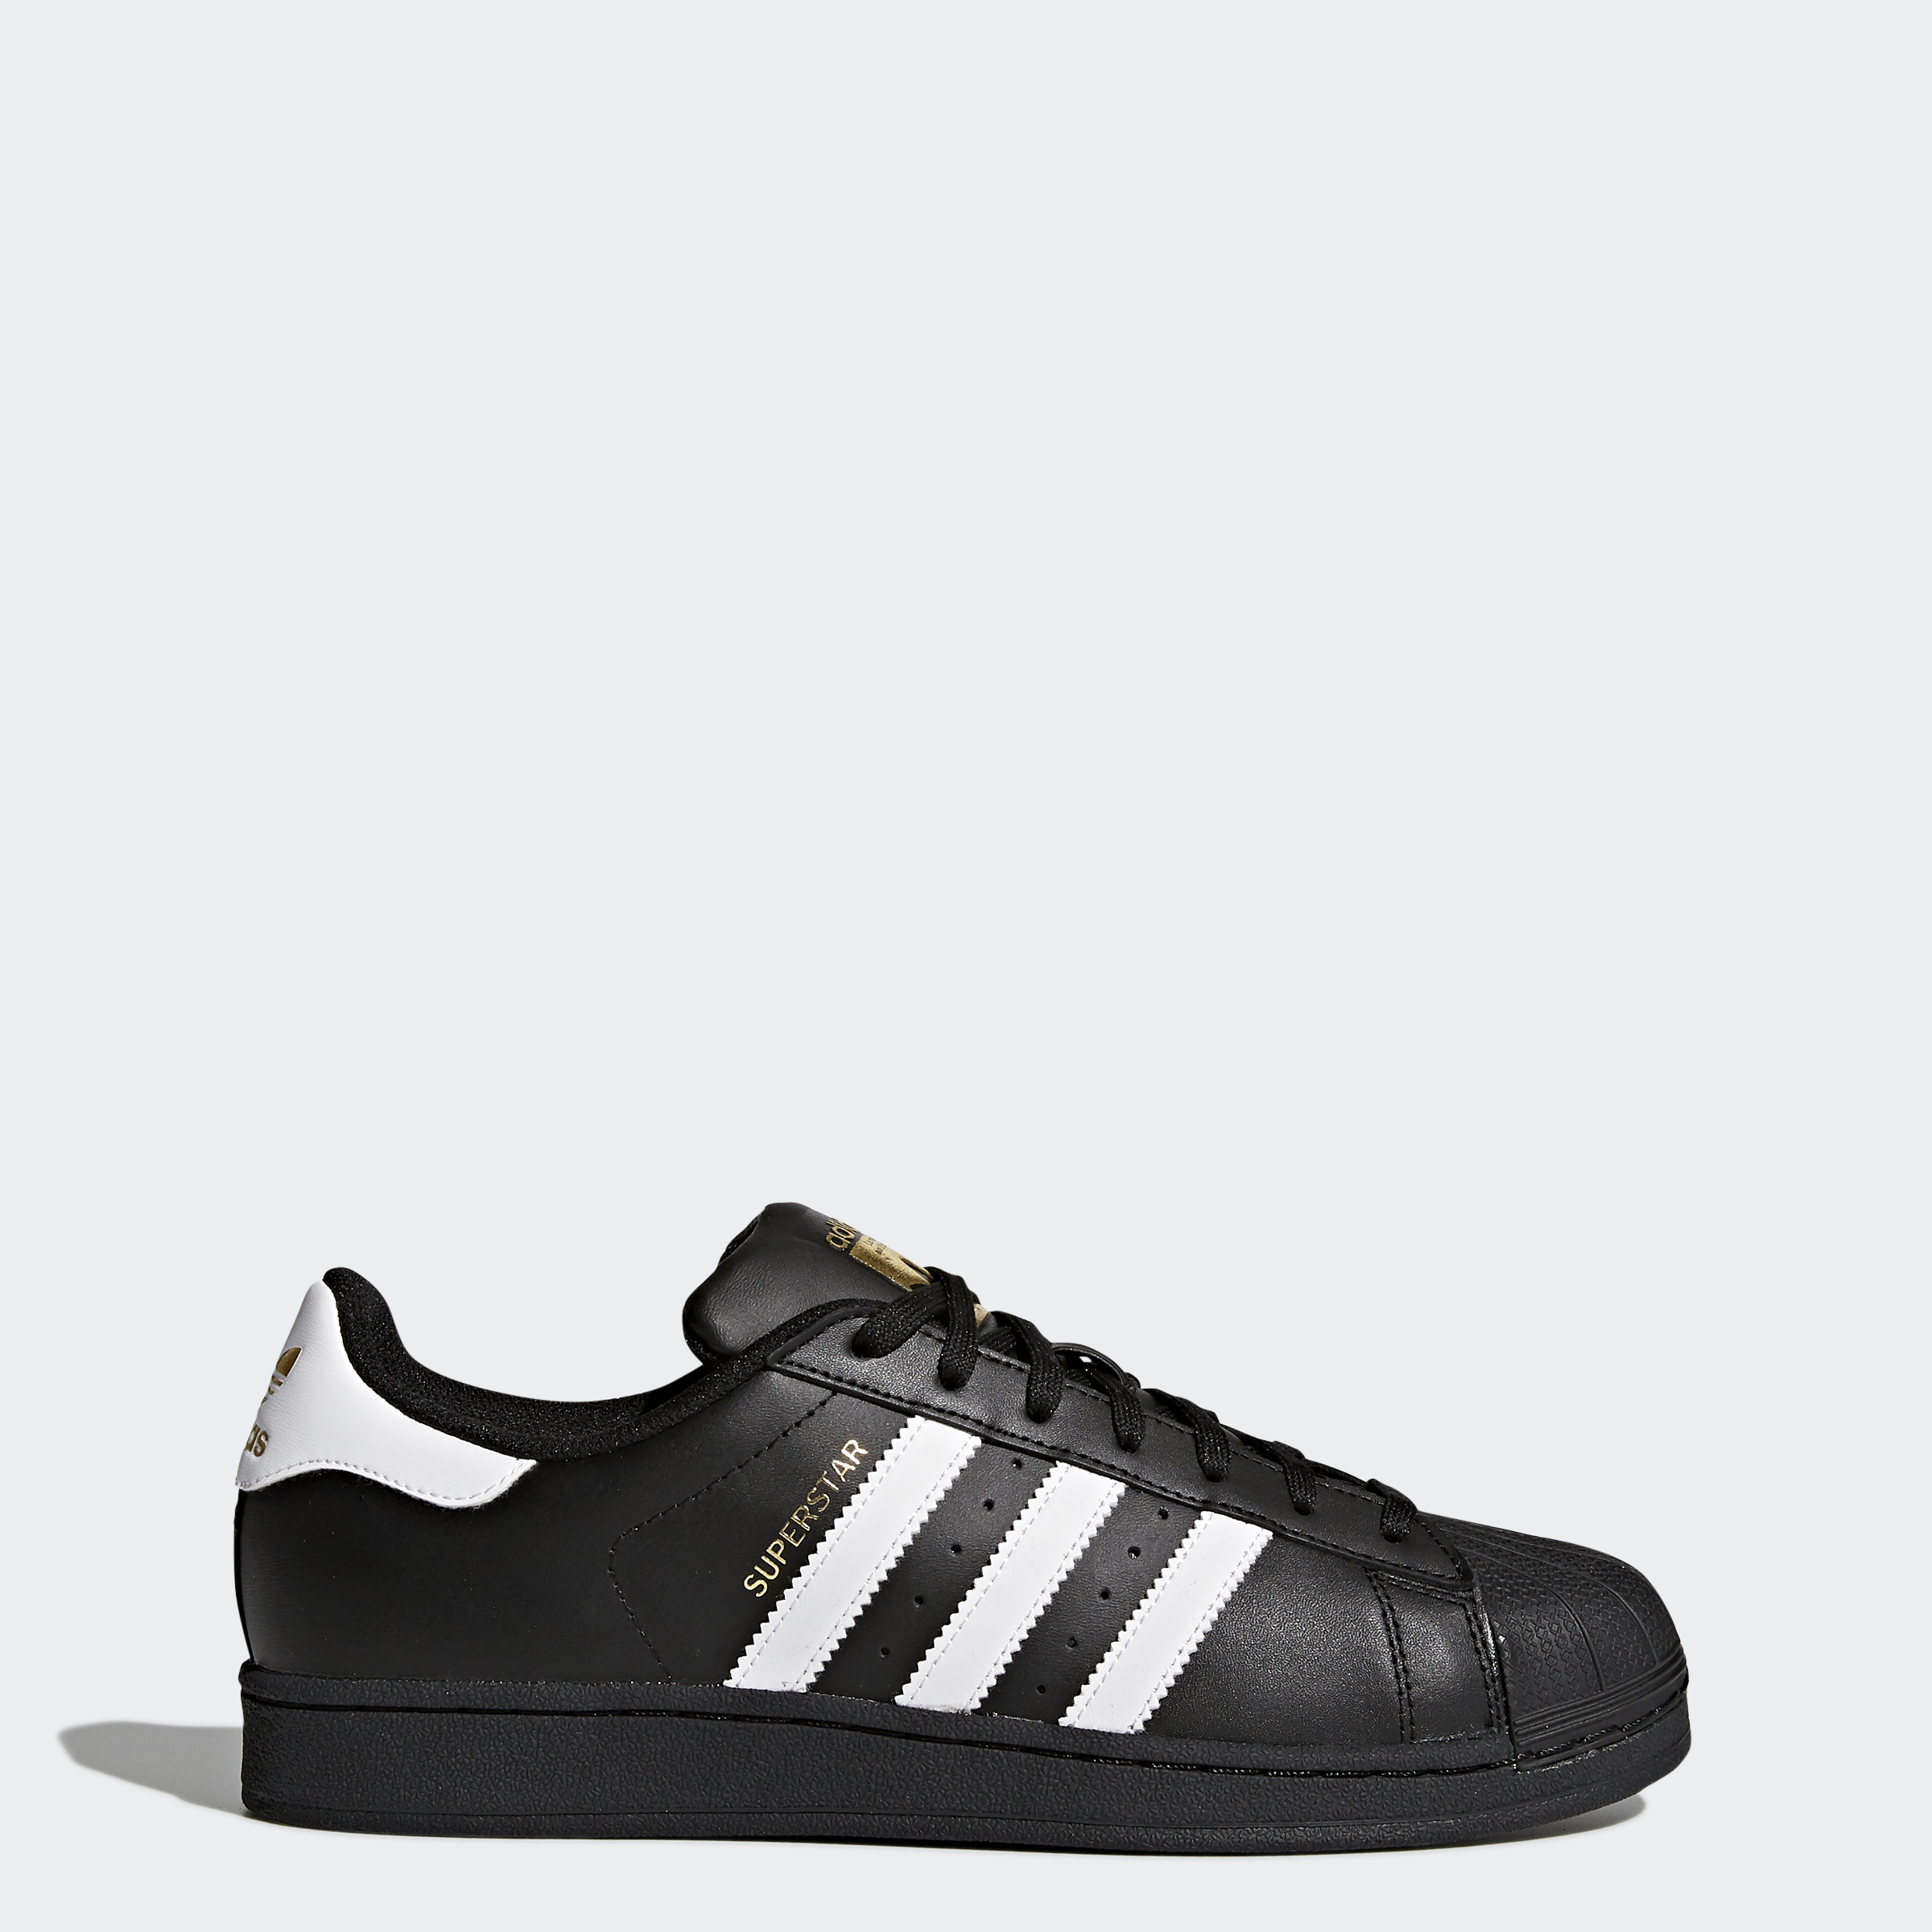 men's shoes sneakers adidas